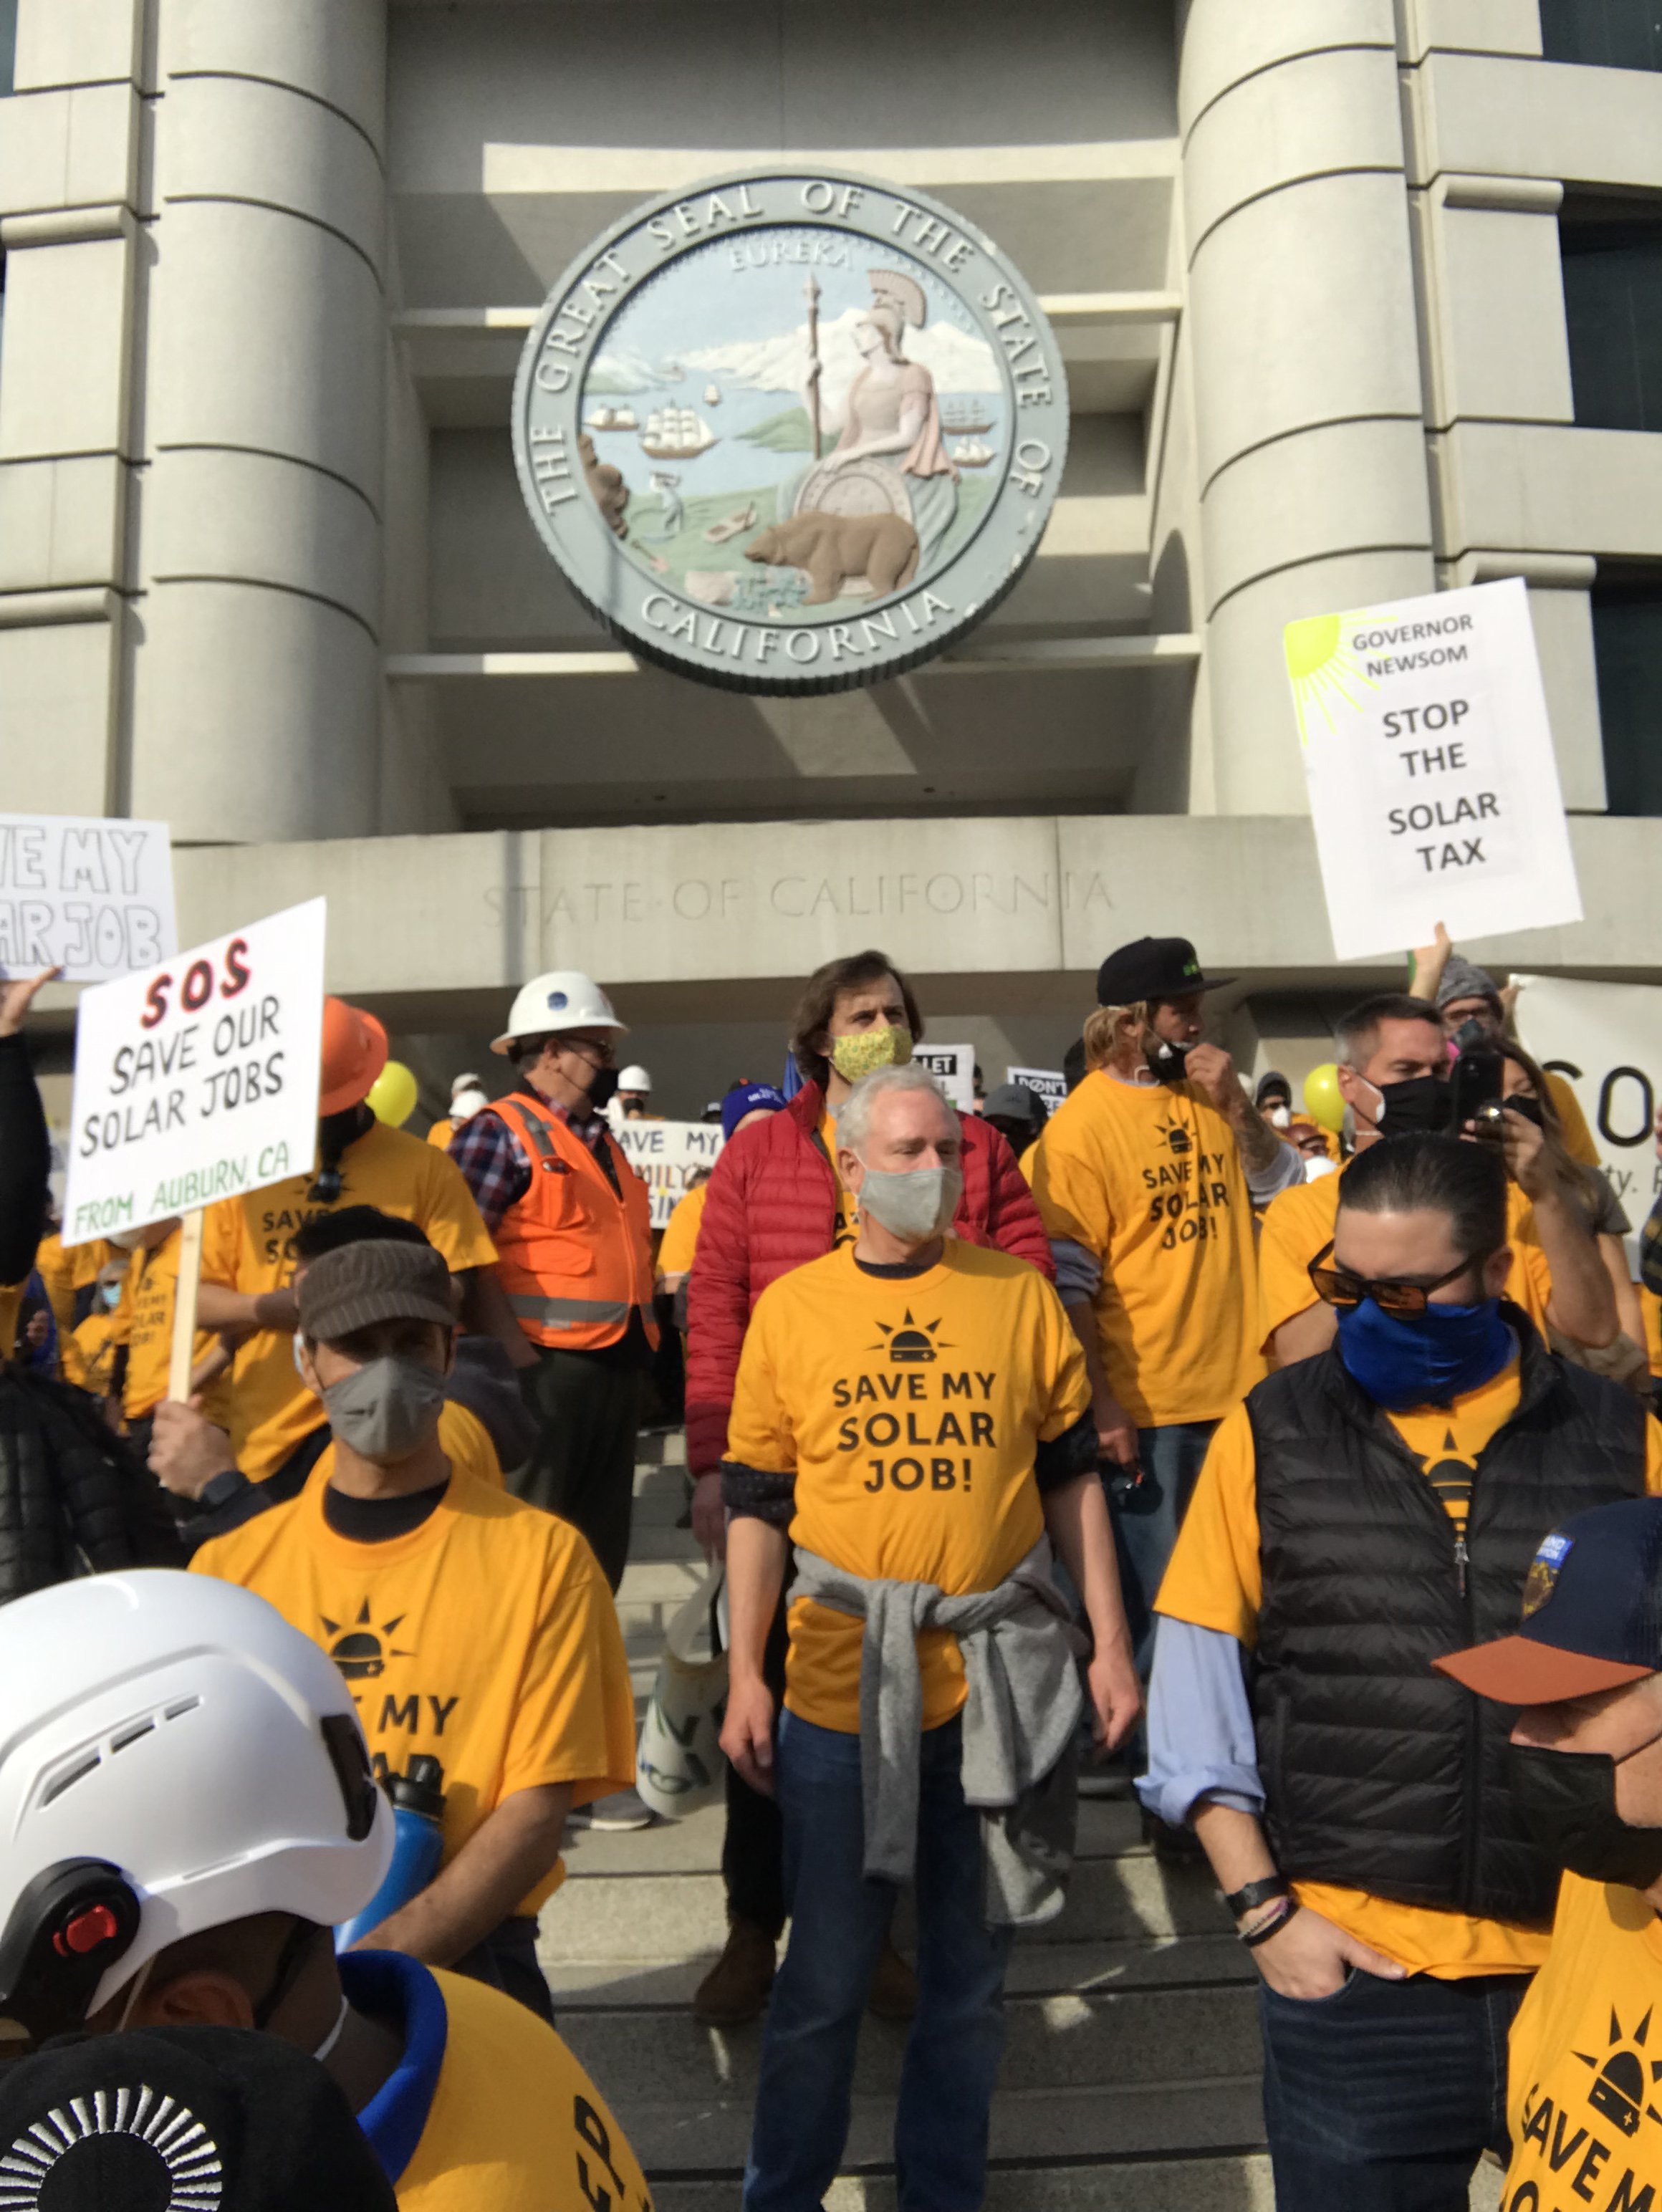  Save our Solar Jobs in California! 